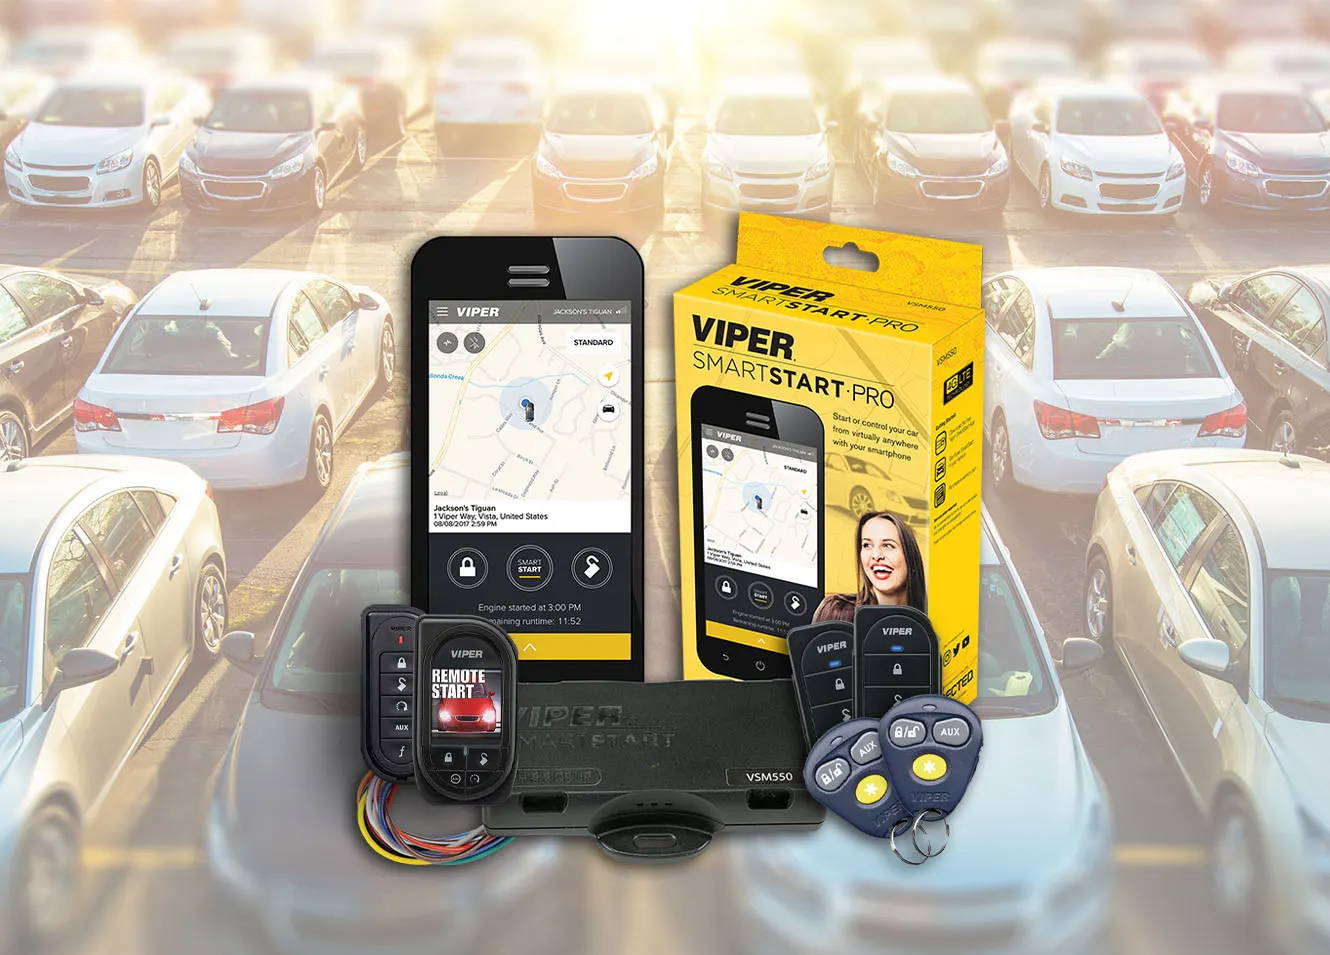 A parking lot full of cars background  with examples of Viper security system products in front of it